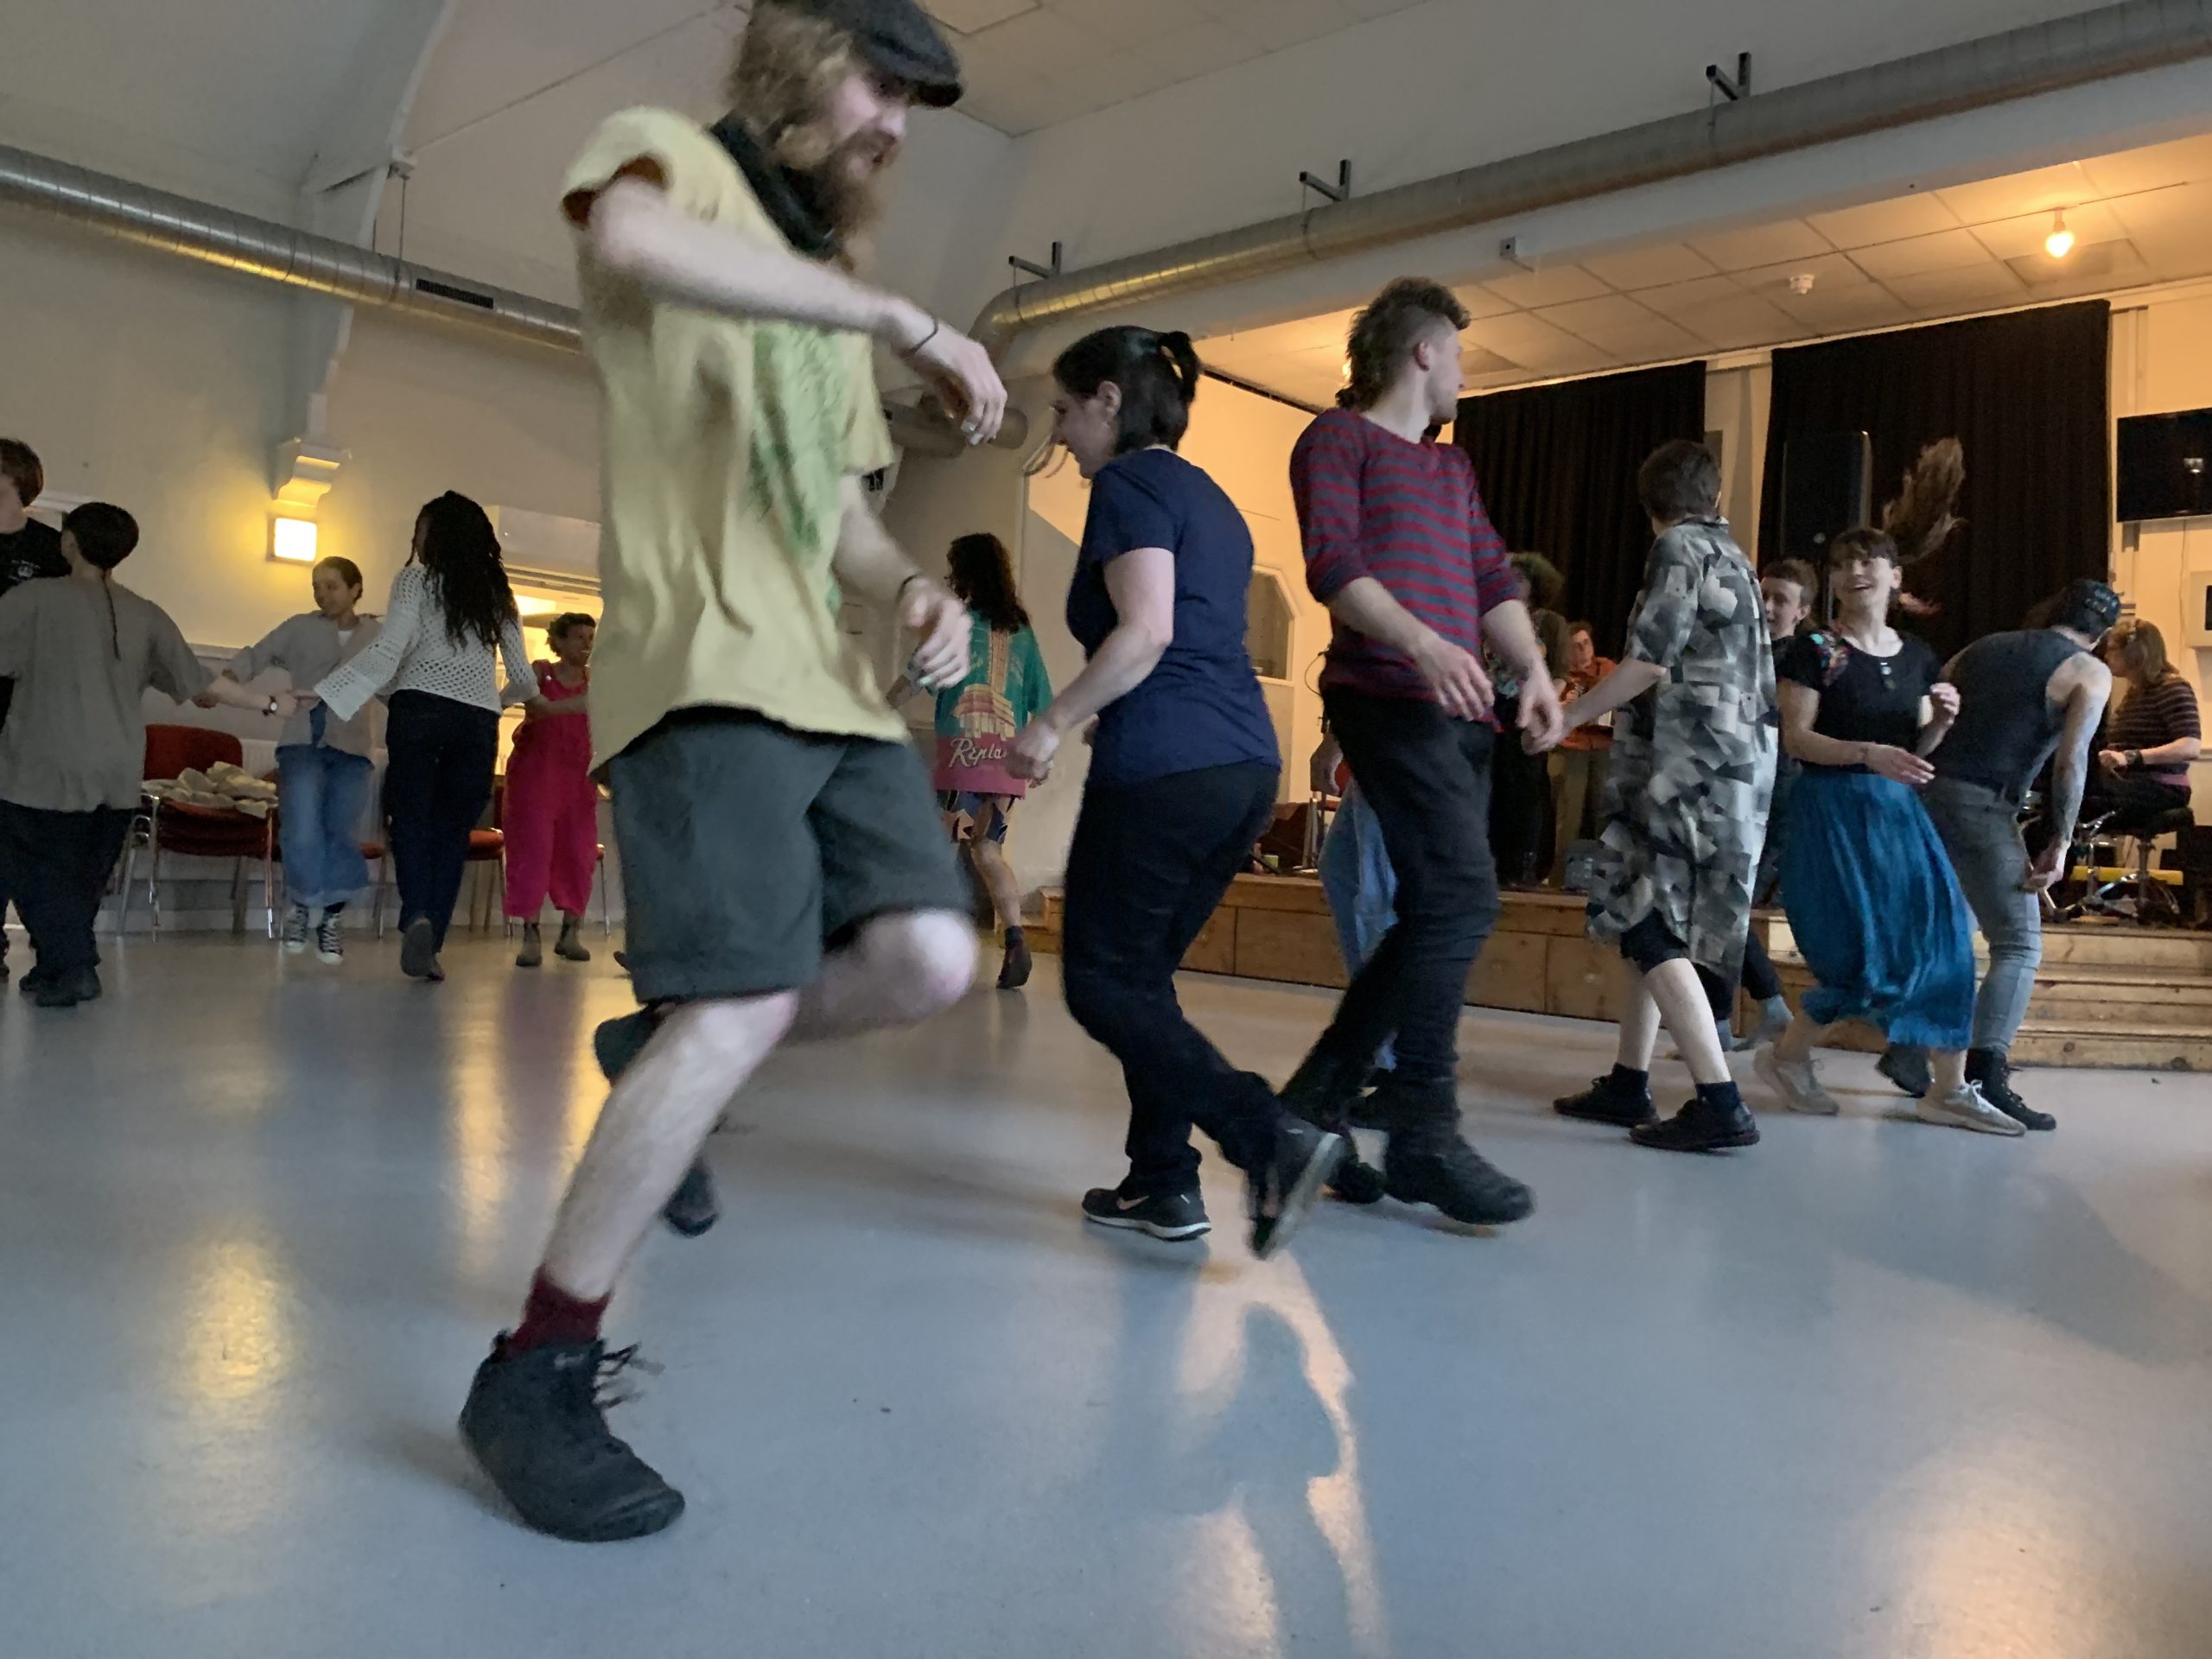 What makes a great ceilidh?